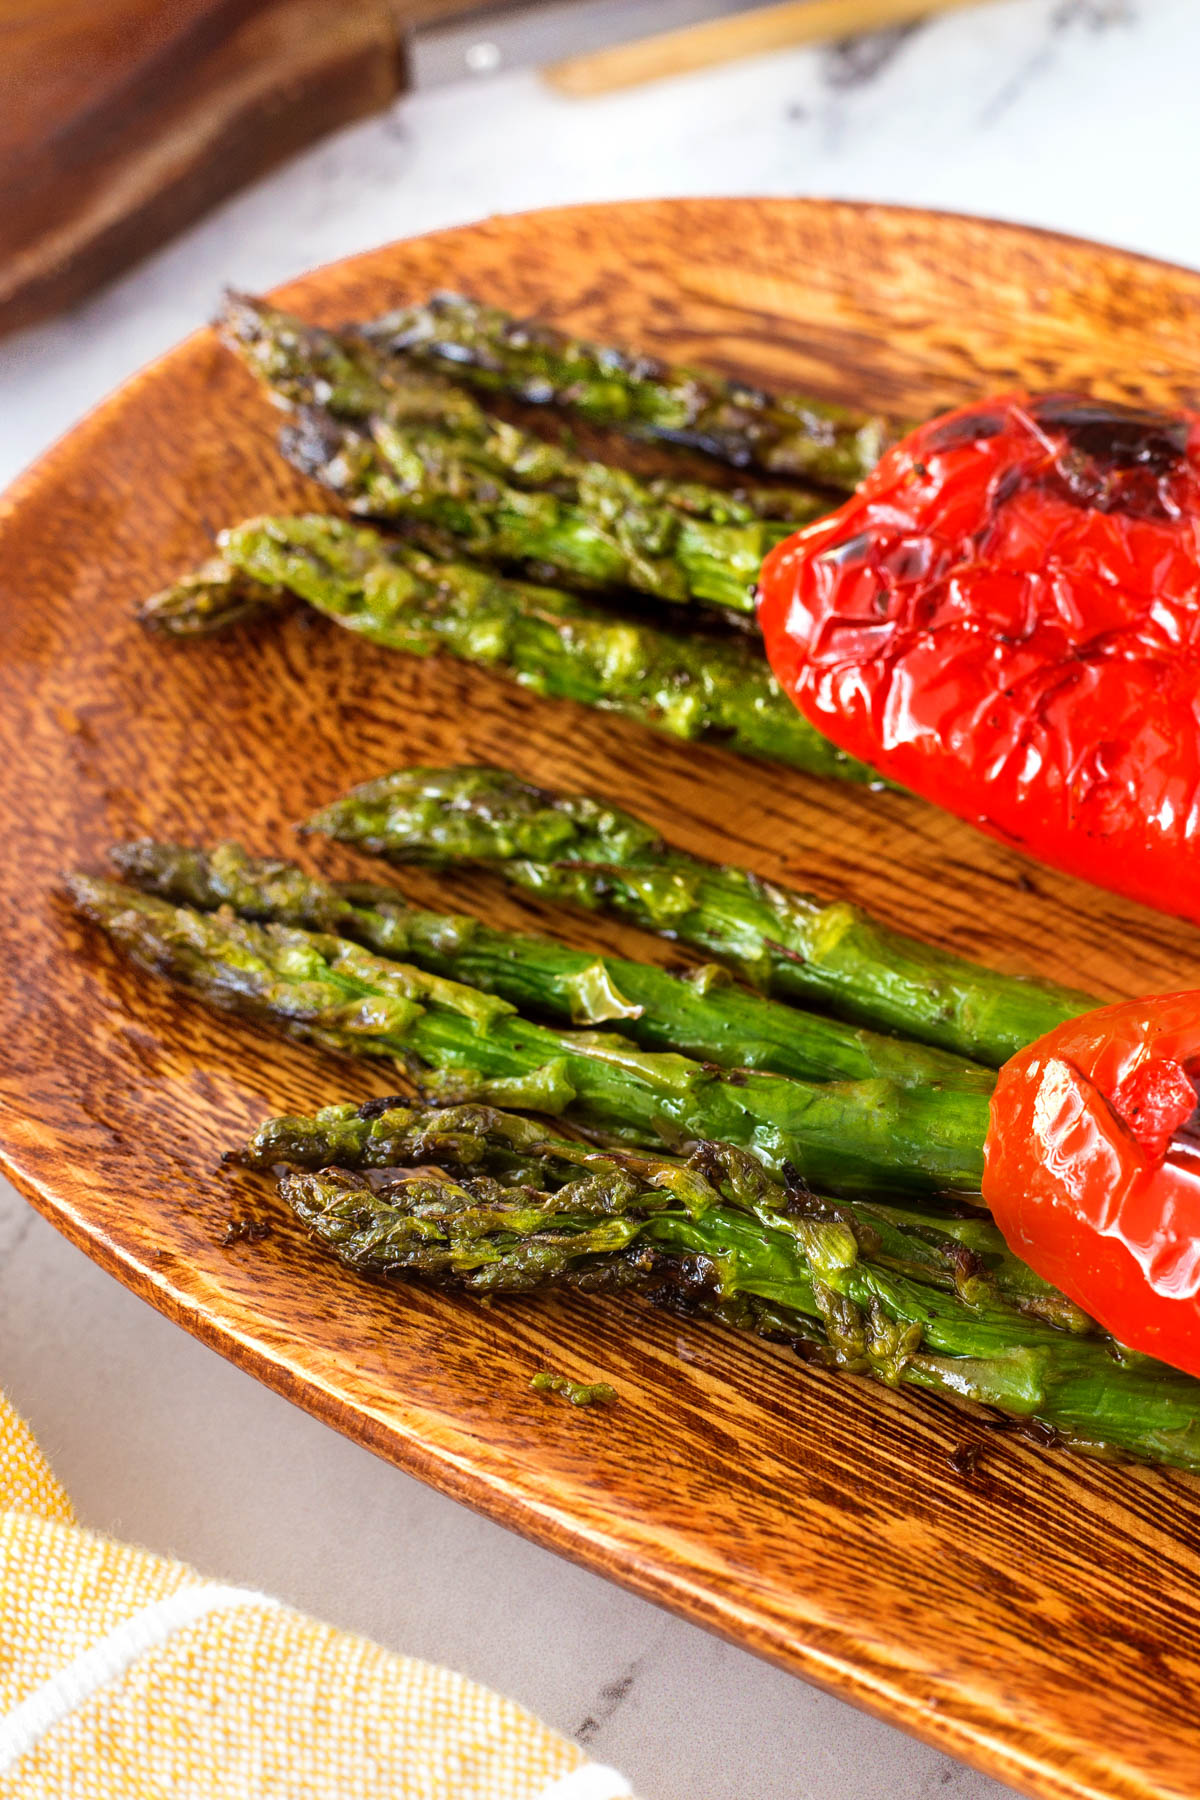 Grilled asparagus bundles laying on a wooden board.